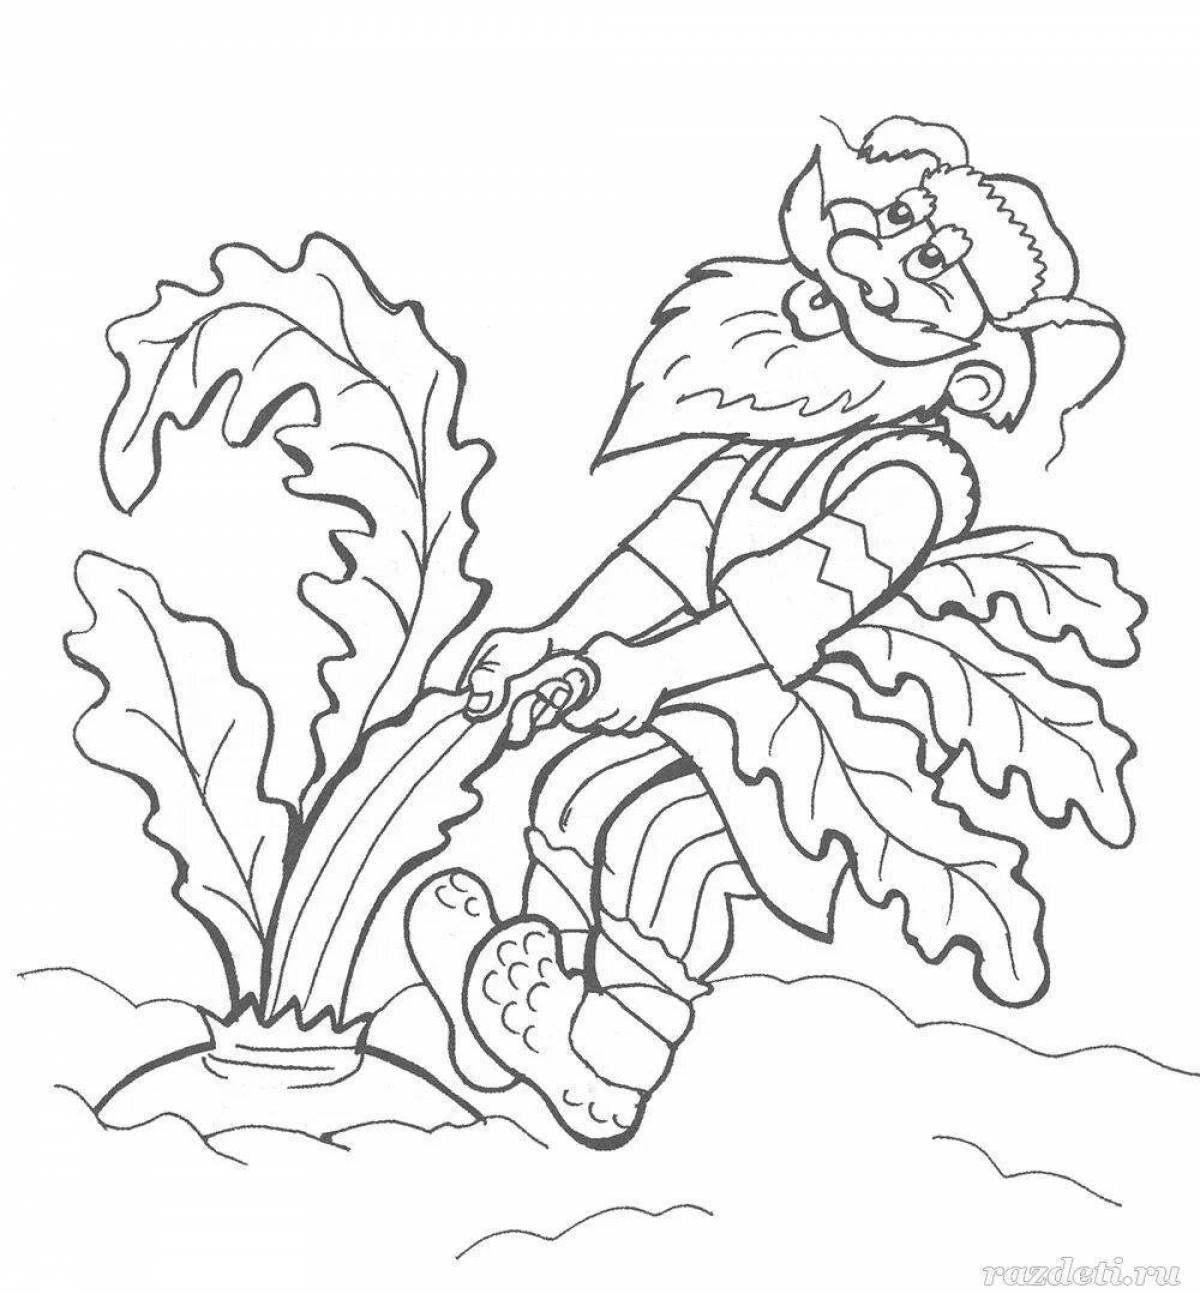 Amazing turnip coloring page for kids